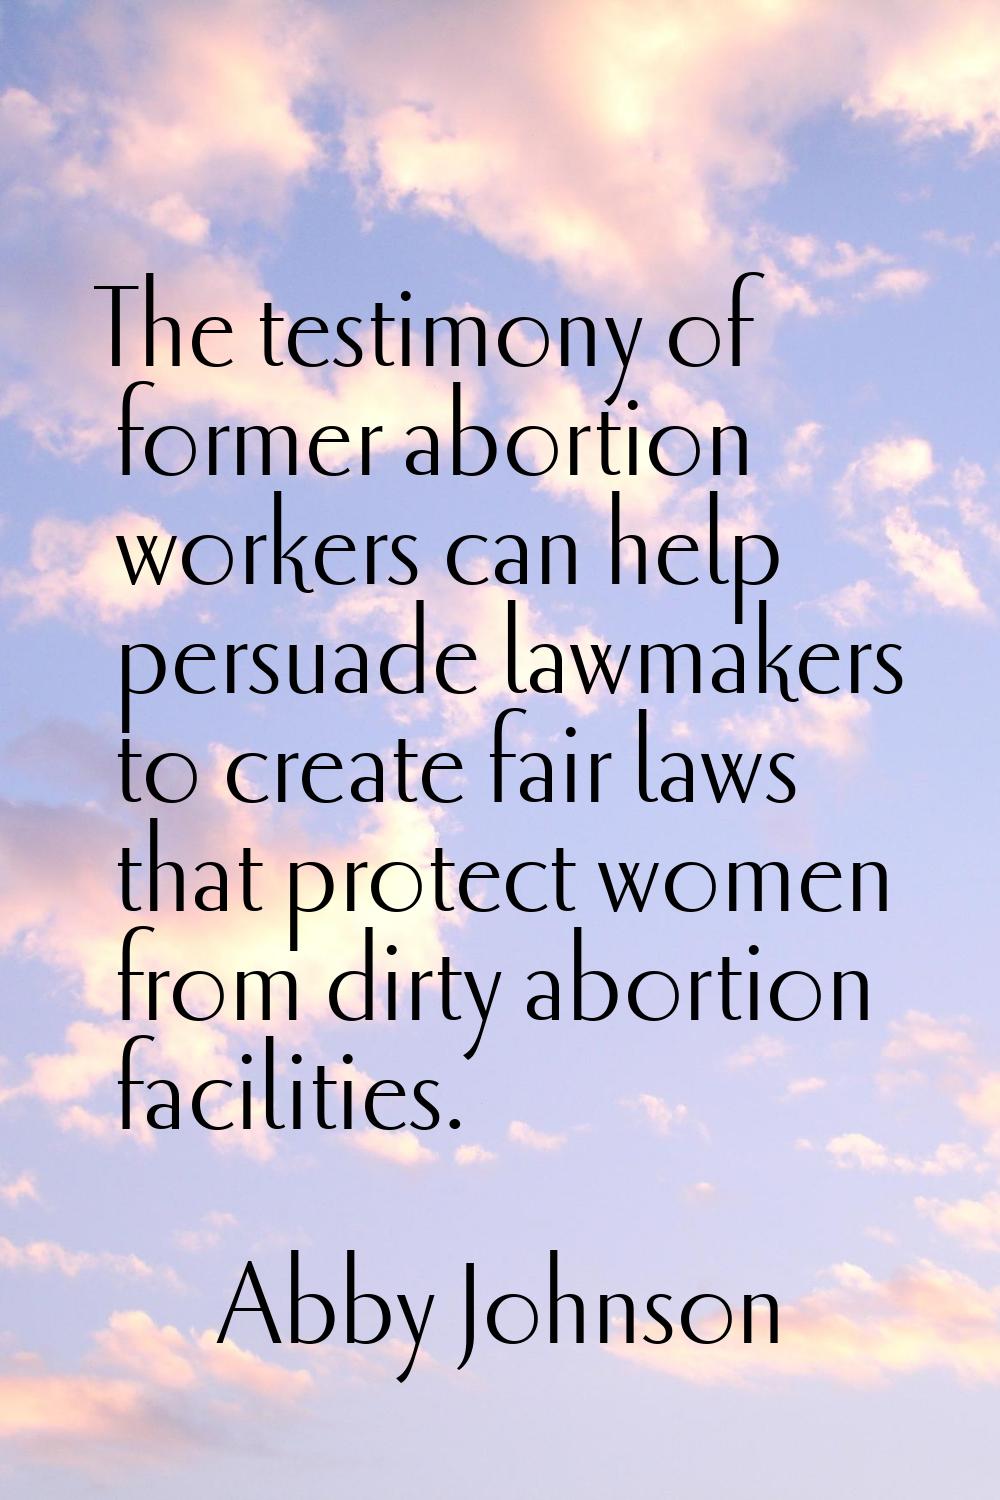 The testimony of former abortion workers can help persuade lawmakers to create fair laws that prote